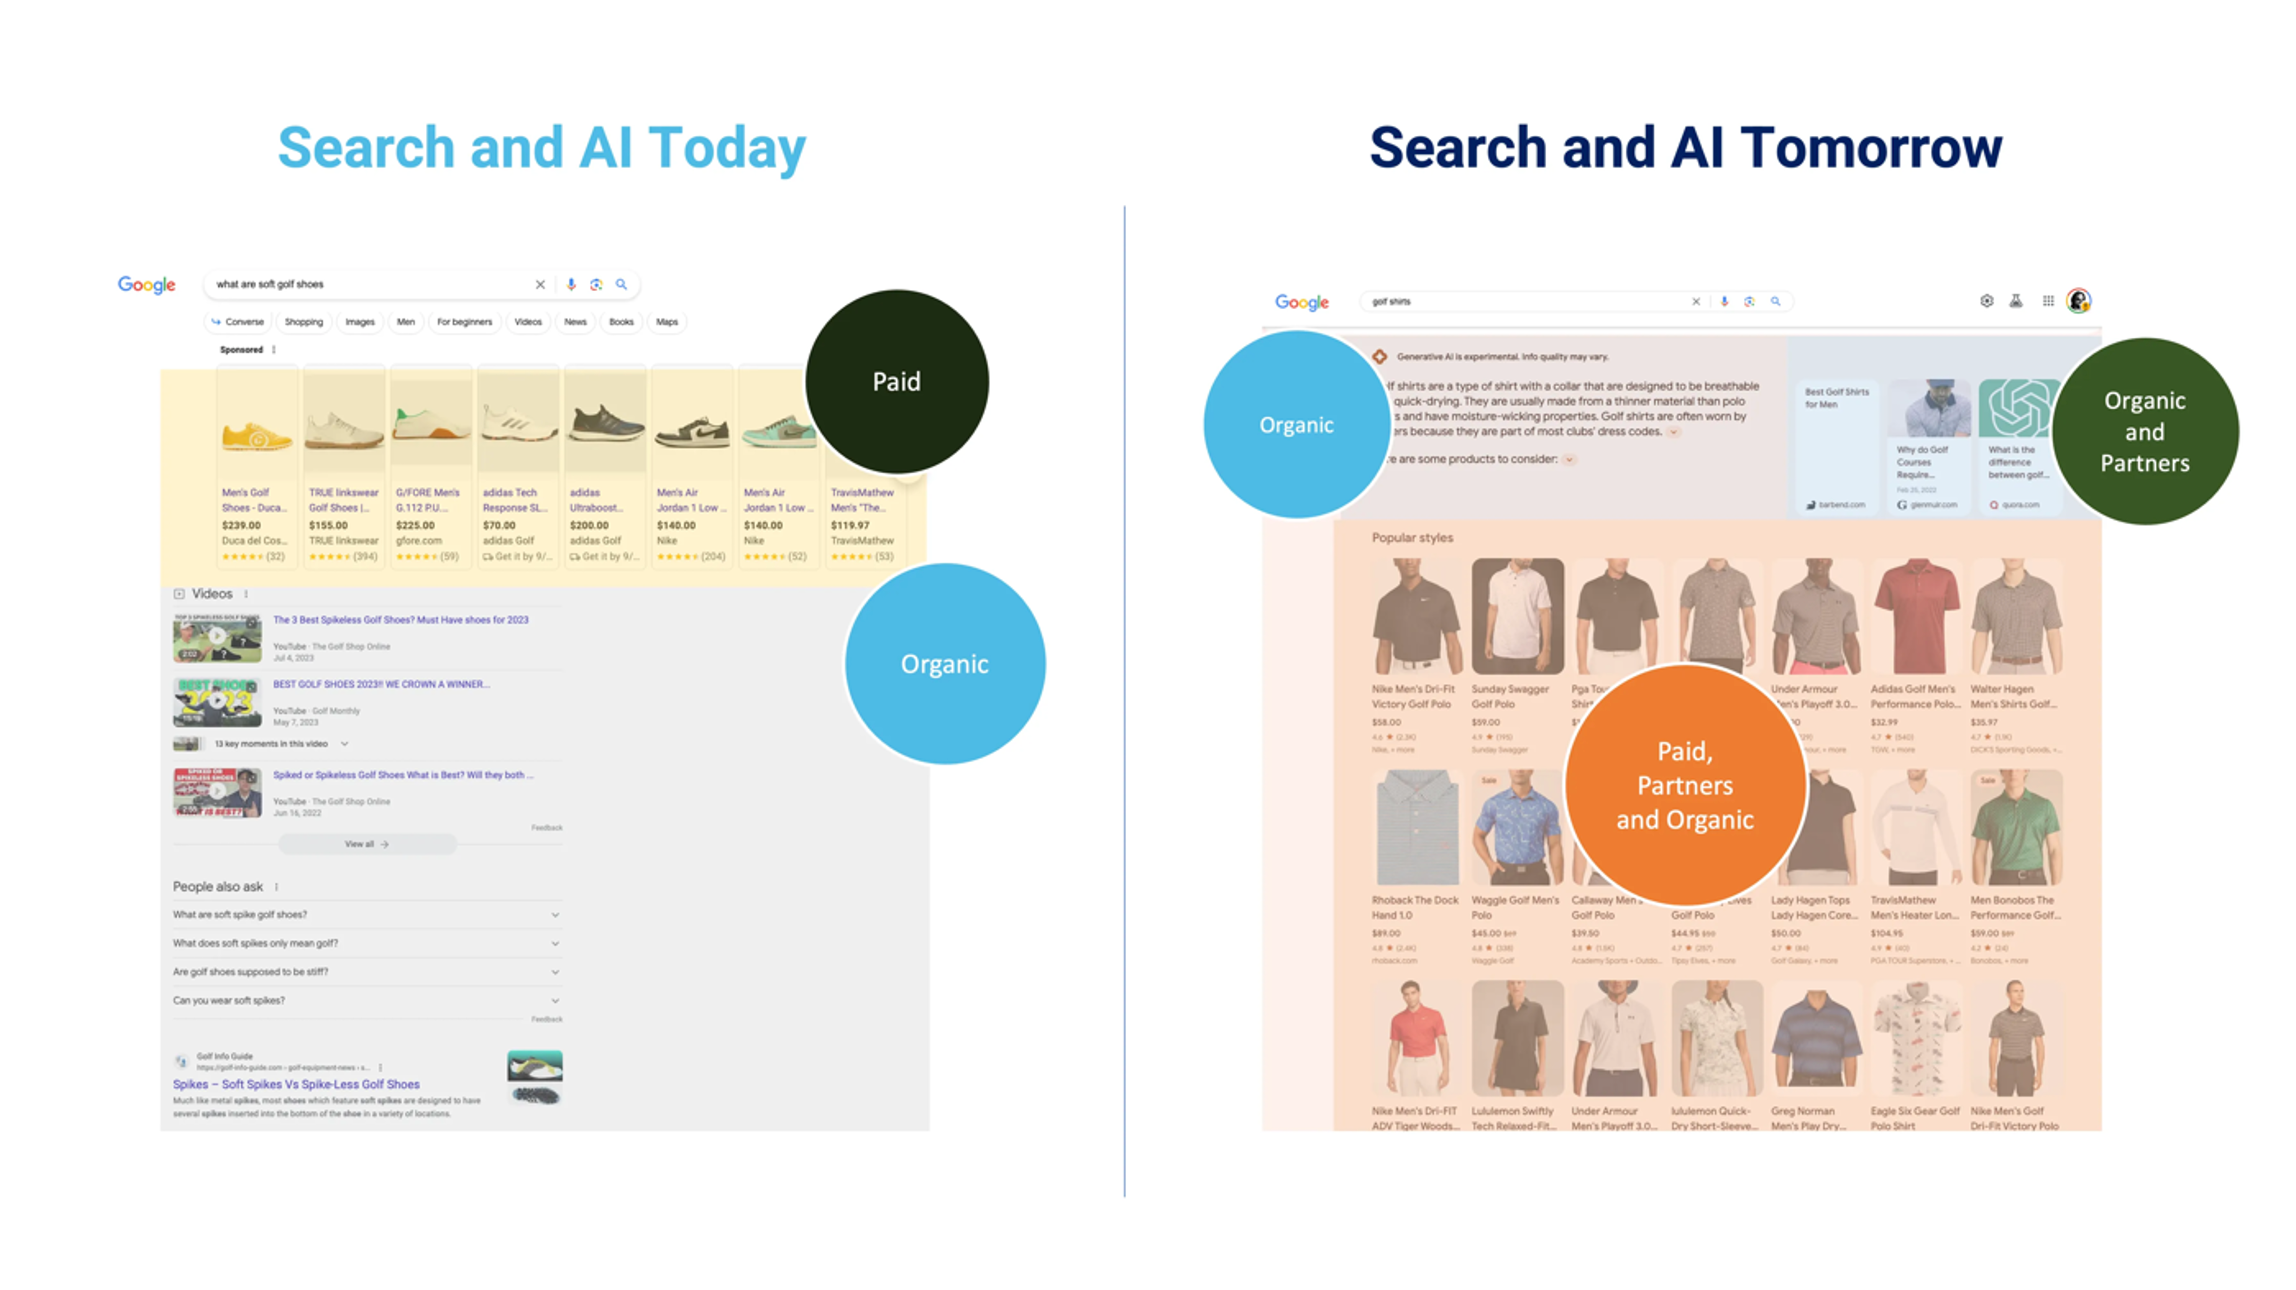 Search and AI today